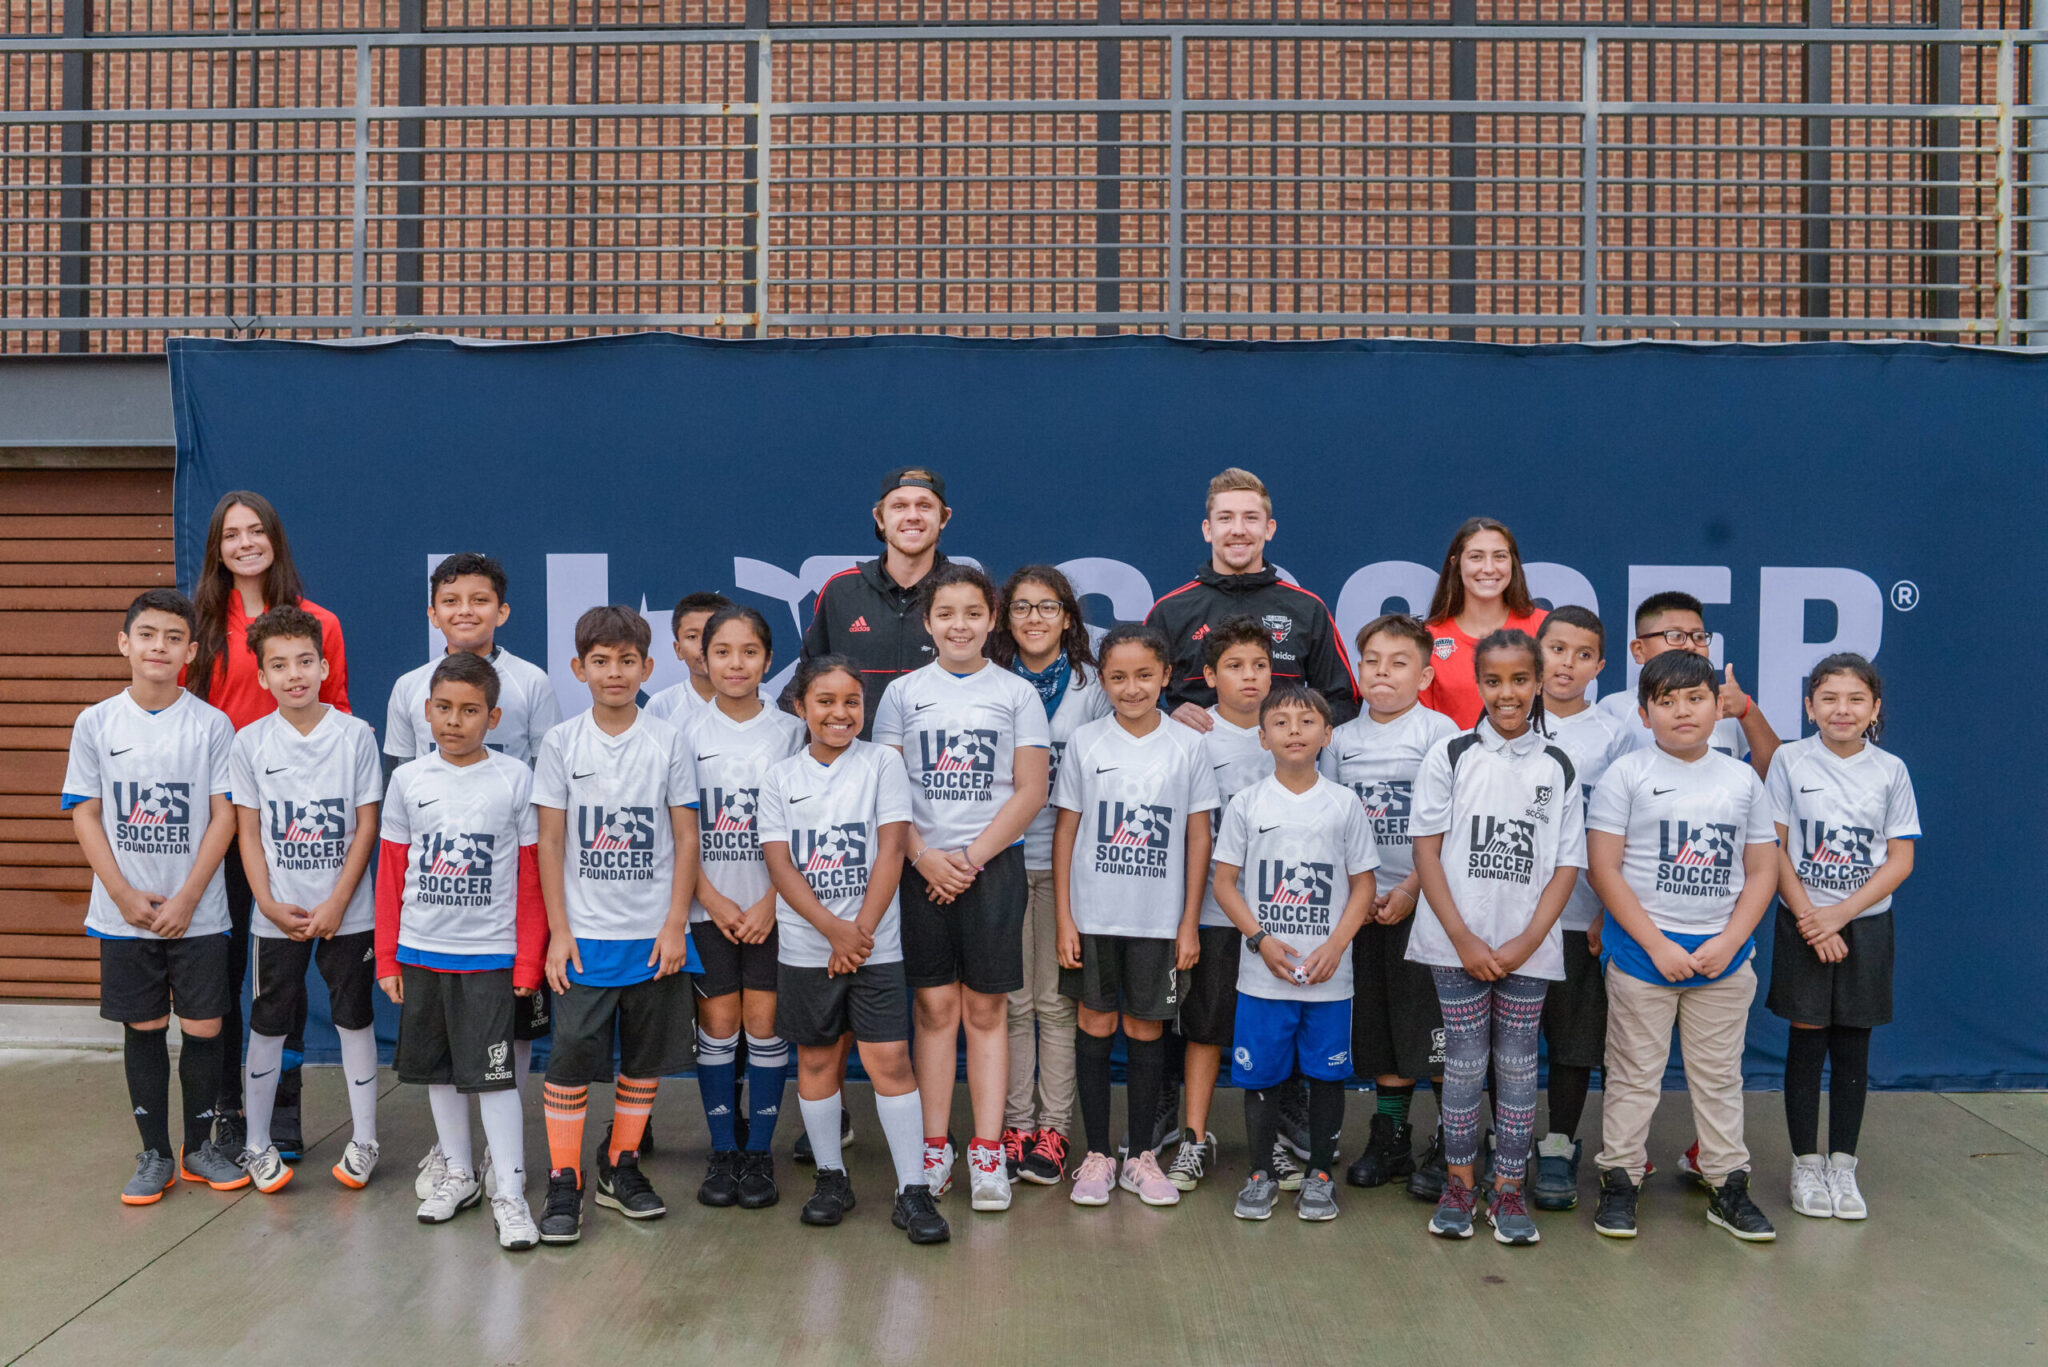 Spirit staff and players to attend and participate in 7th annual Congressional Soccer Match Featured Image